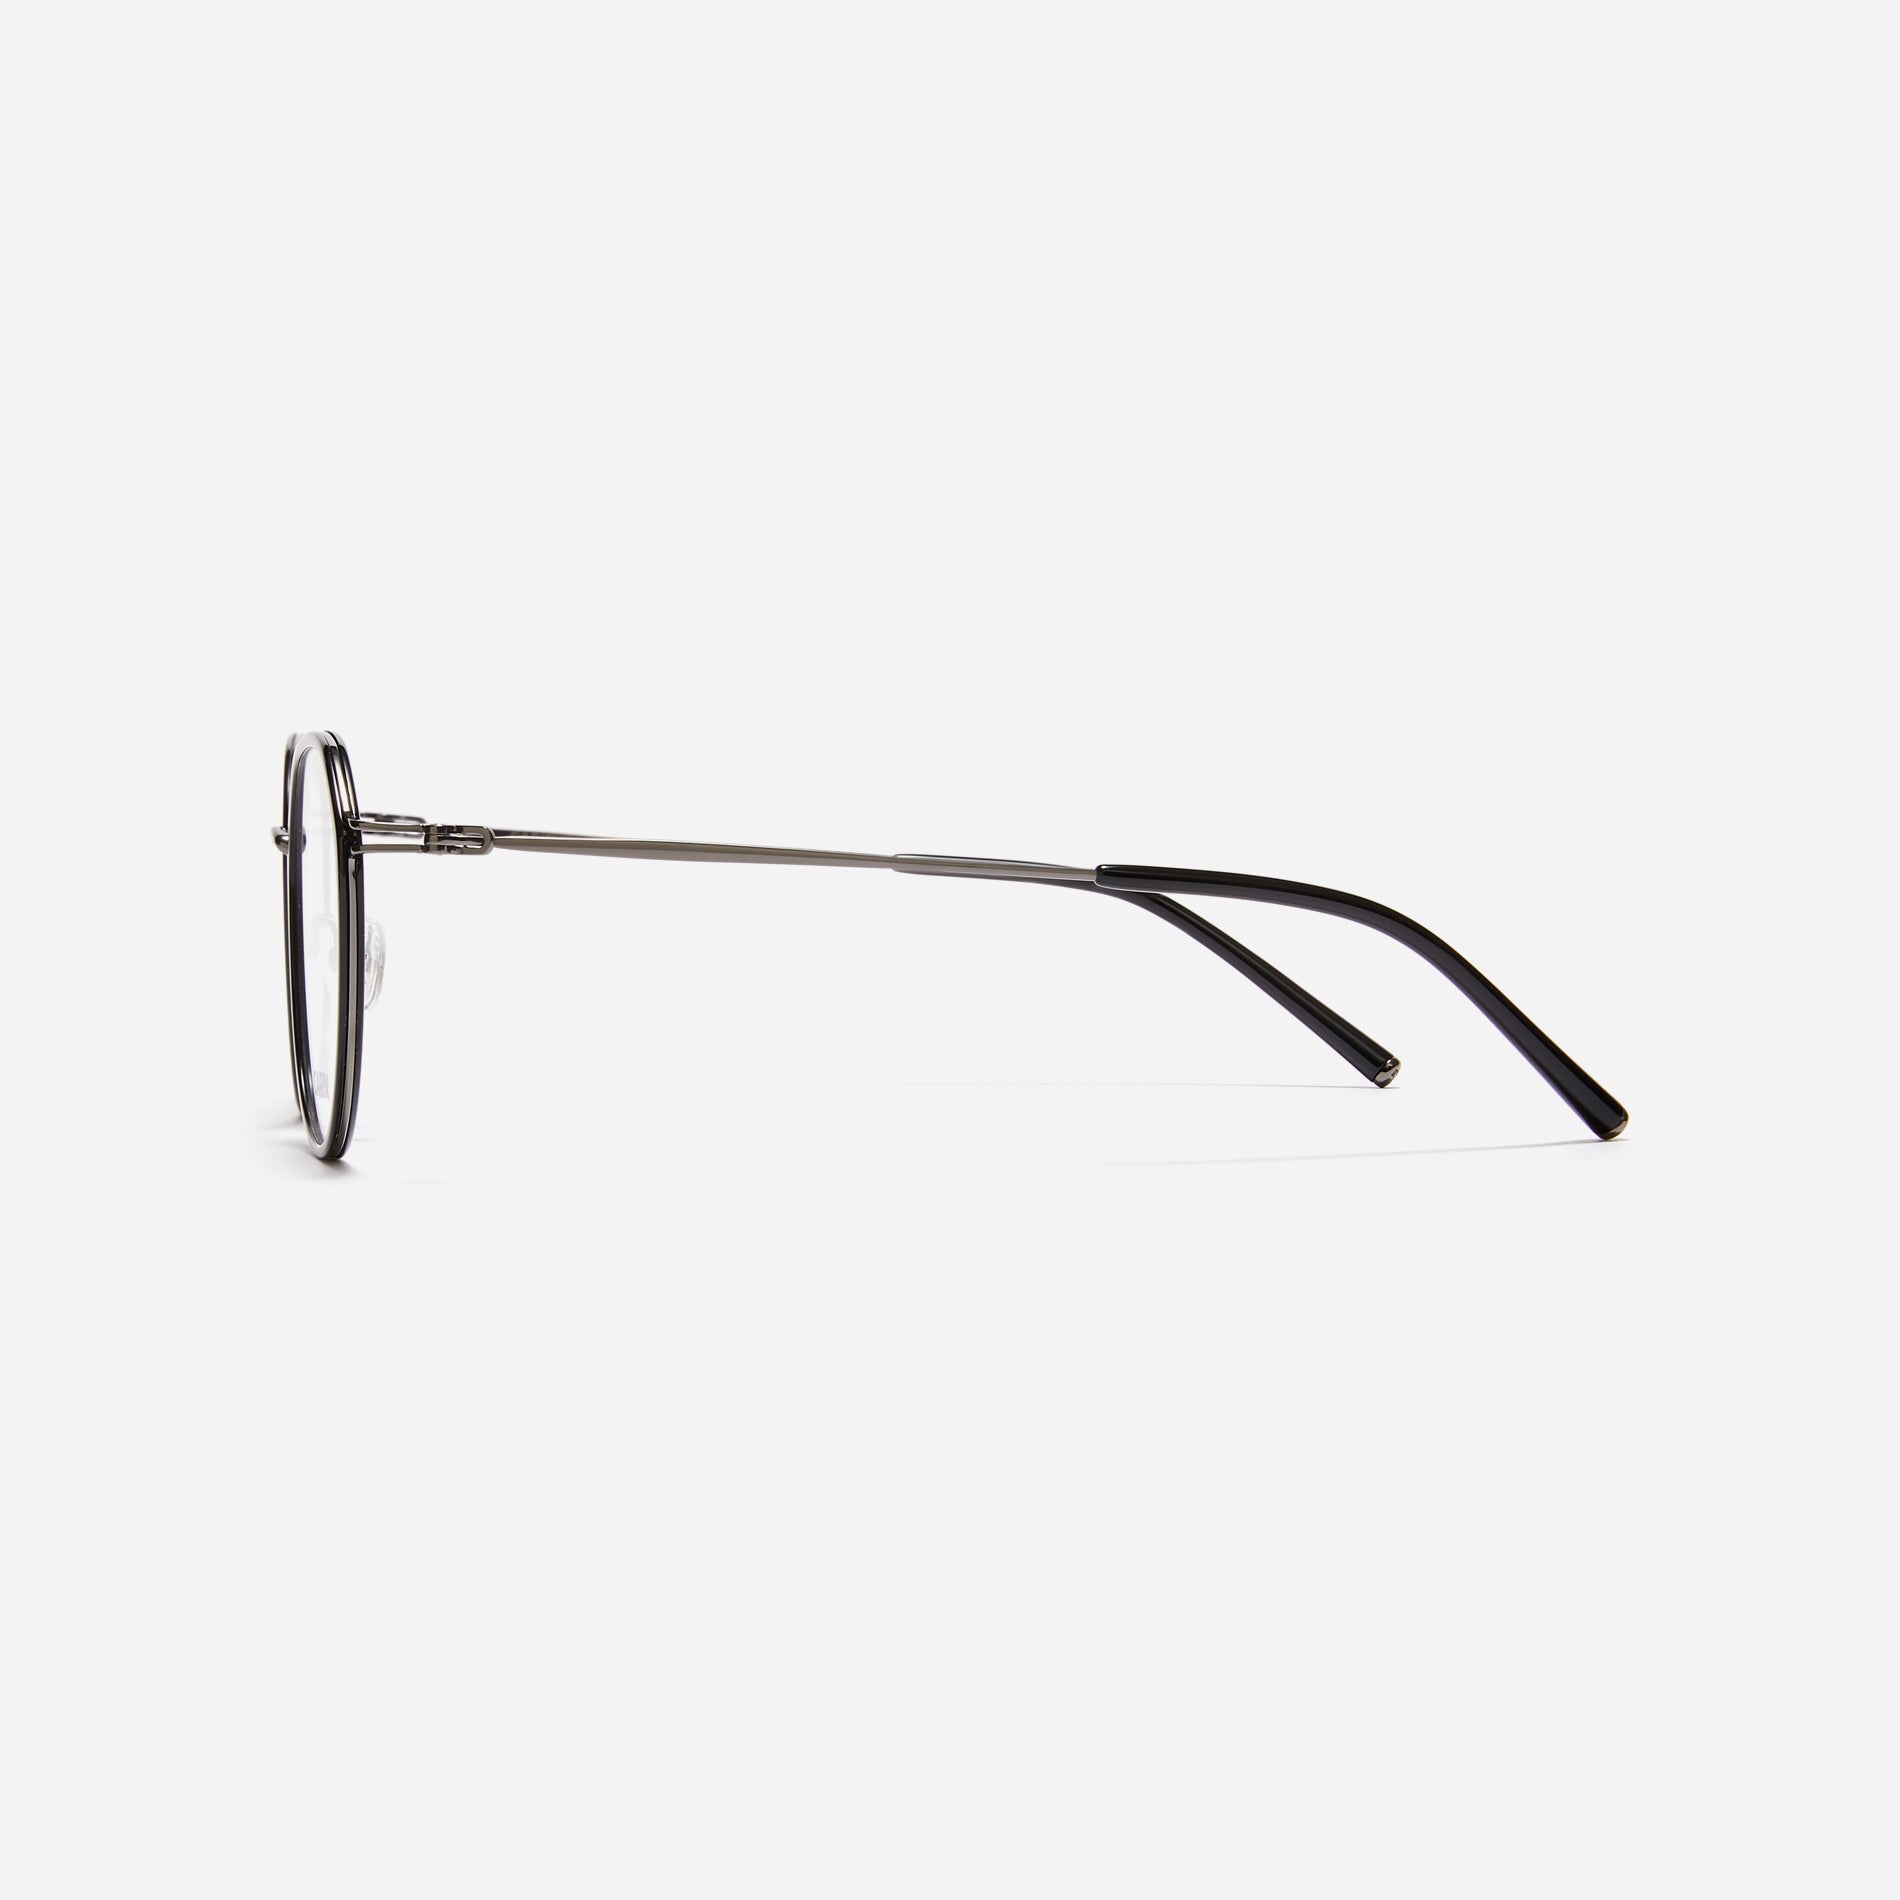 Combination eyeglasses featuring a harmonious blend of a polygonal lens shape and an acetate frame. These eyeglasses are characterized by a delicate acetate rim that secures the frame and hinge details. The slim temples, made from lightweight and elastic B-Titanium material, ensure a consistently comfortable fit.